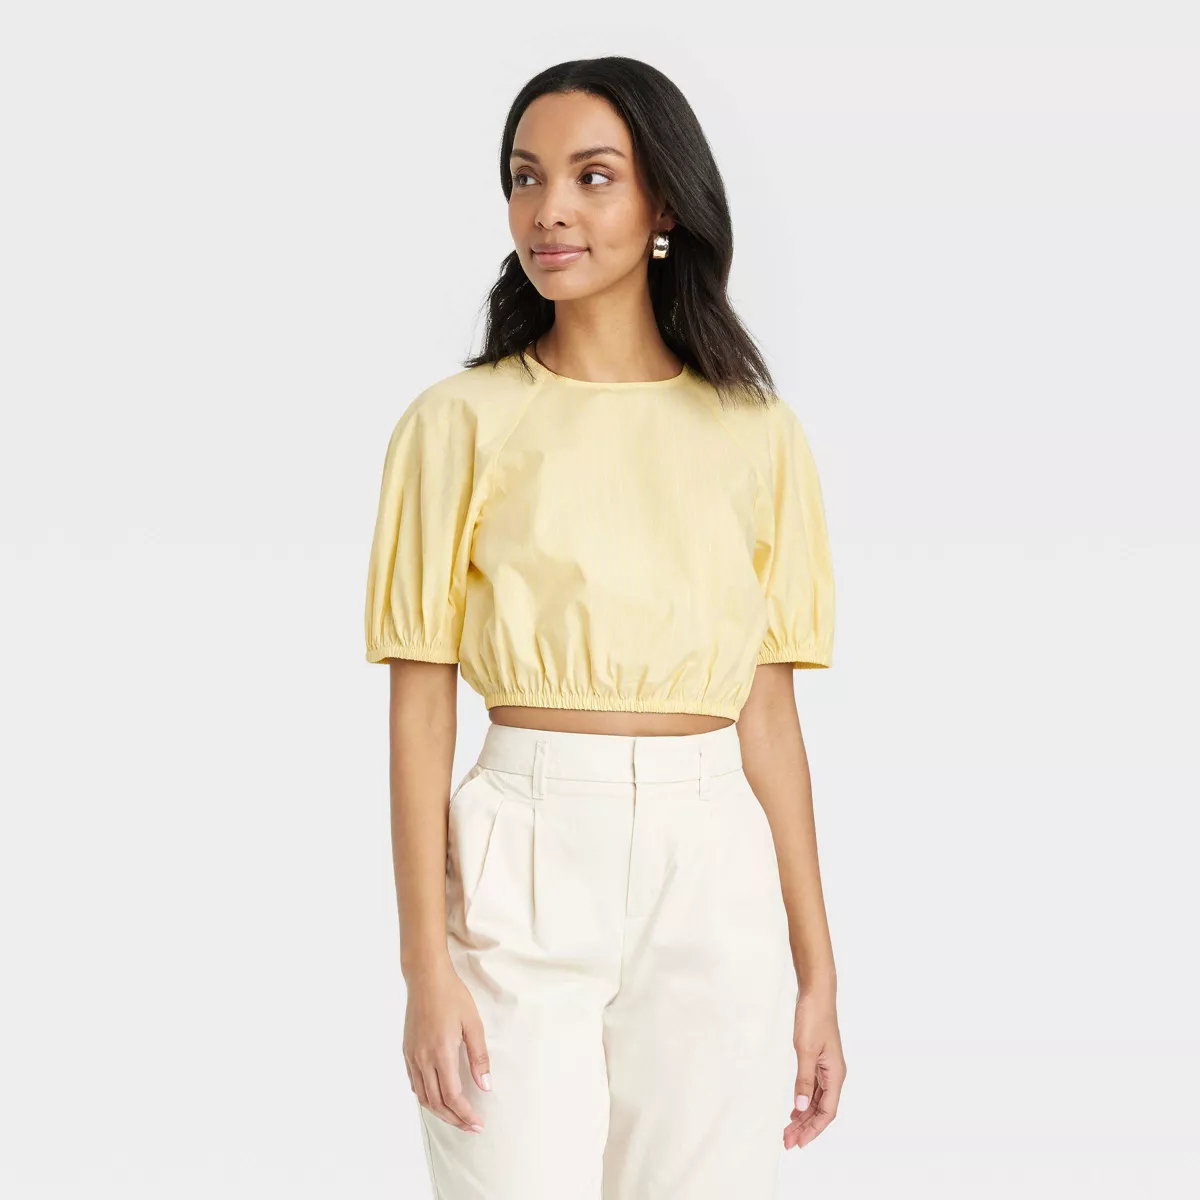 Model in a yellow cropped blouse and high-waisted white pants, standing posed for a fashion showcase